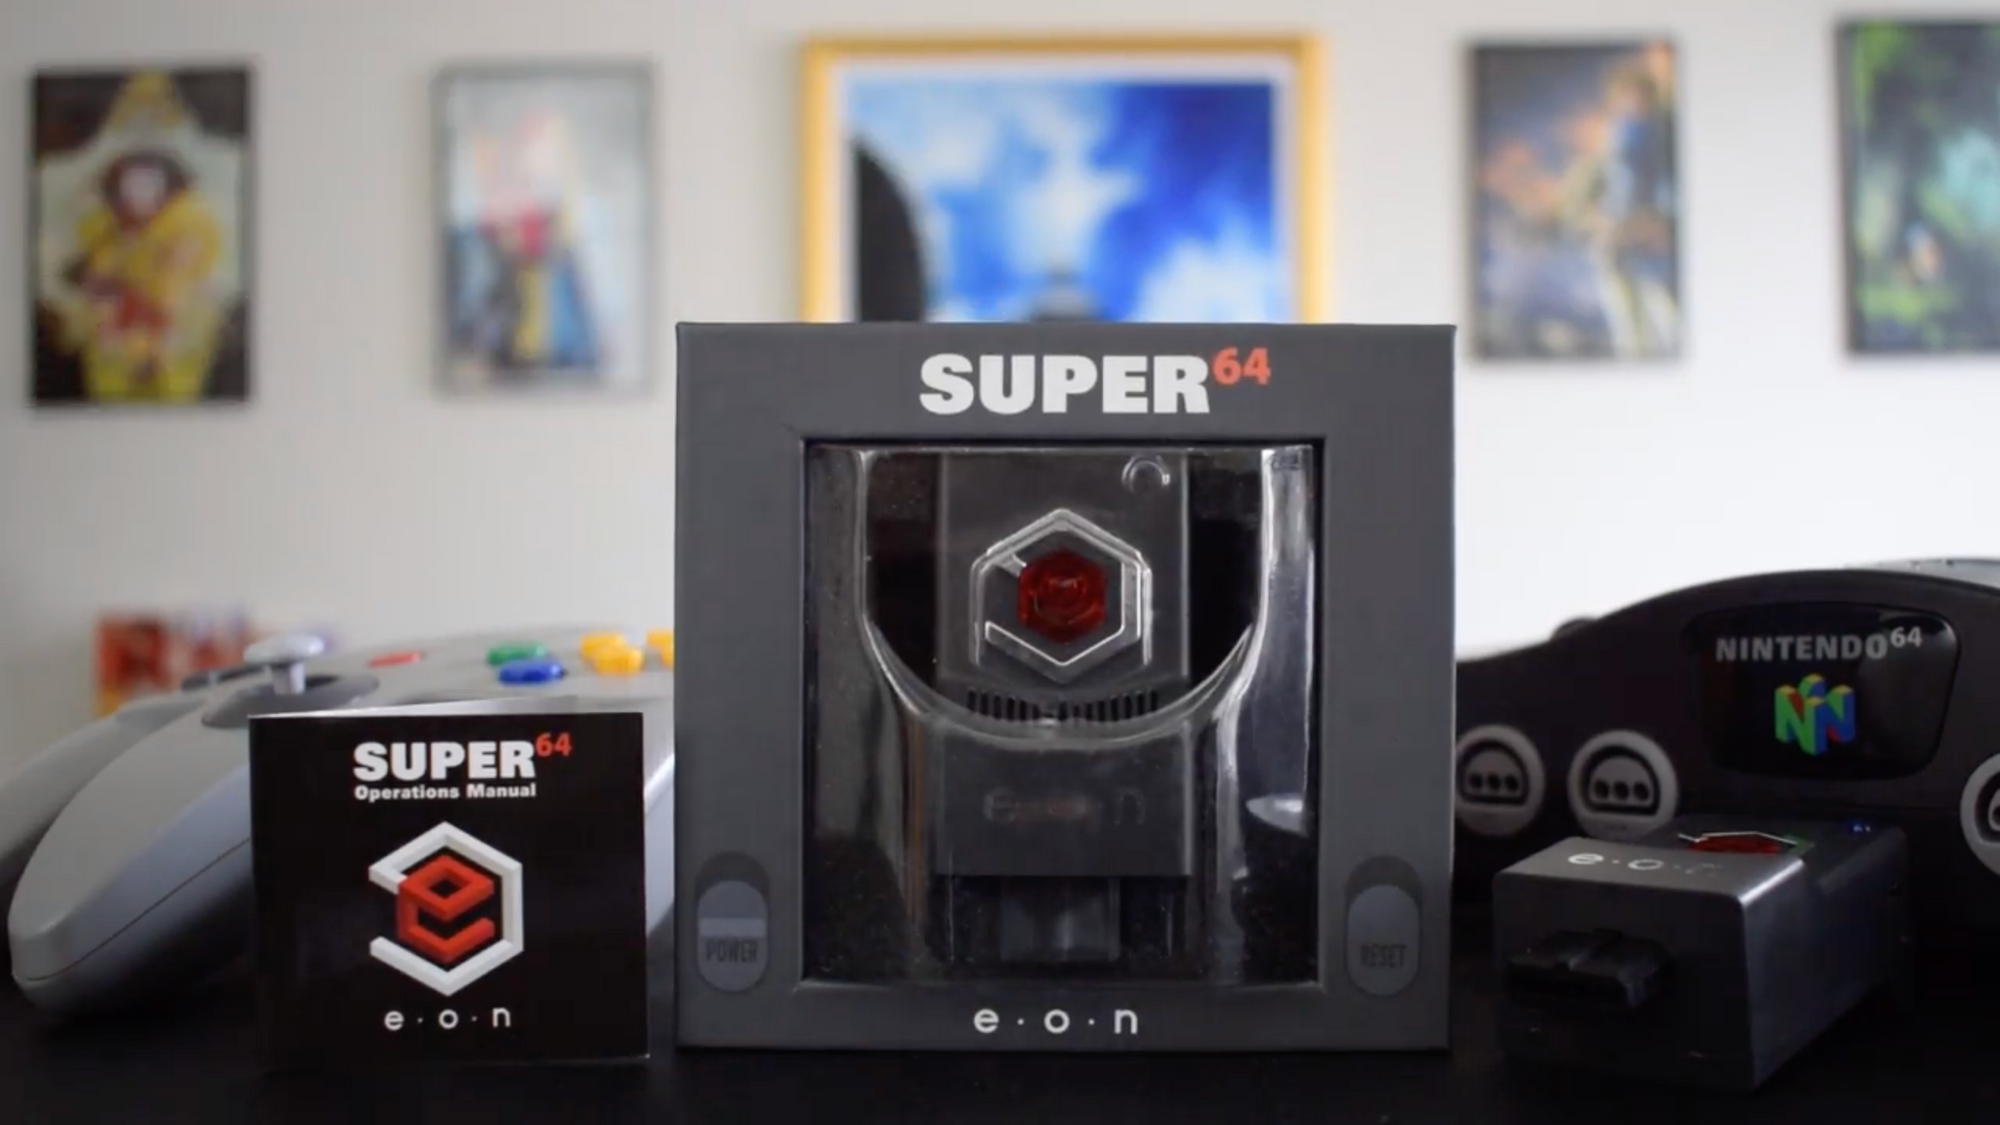 Super 64 HDMI Adapter Allows Your Nintendo 64 to look Crisp on HD TVs